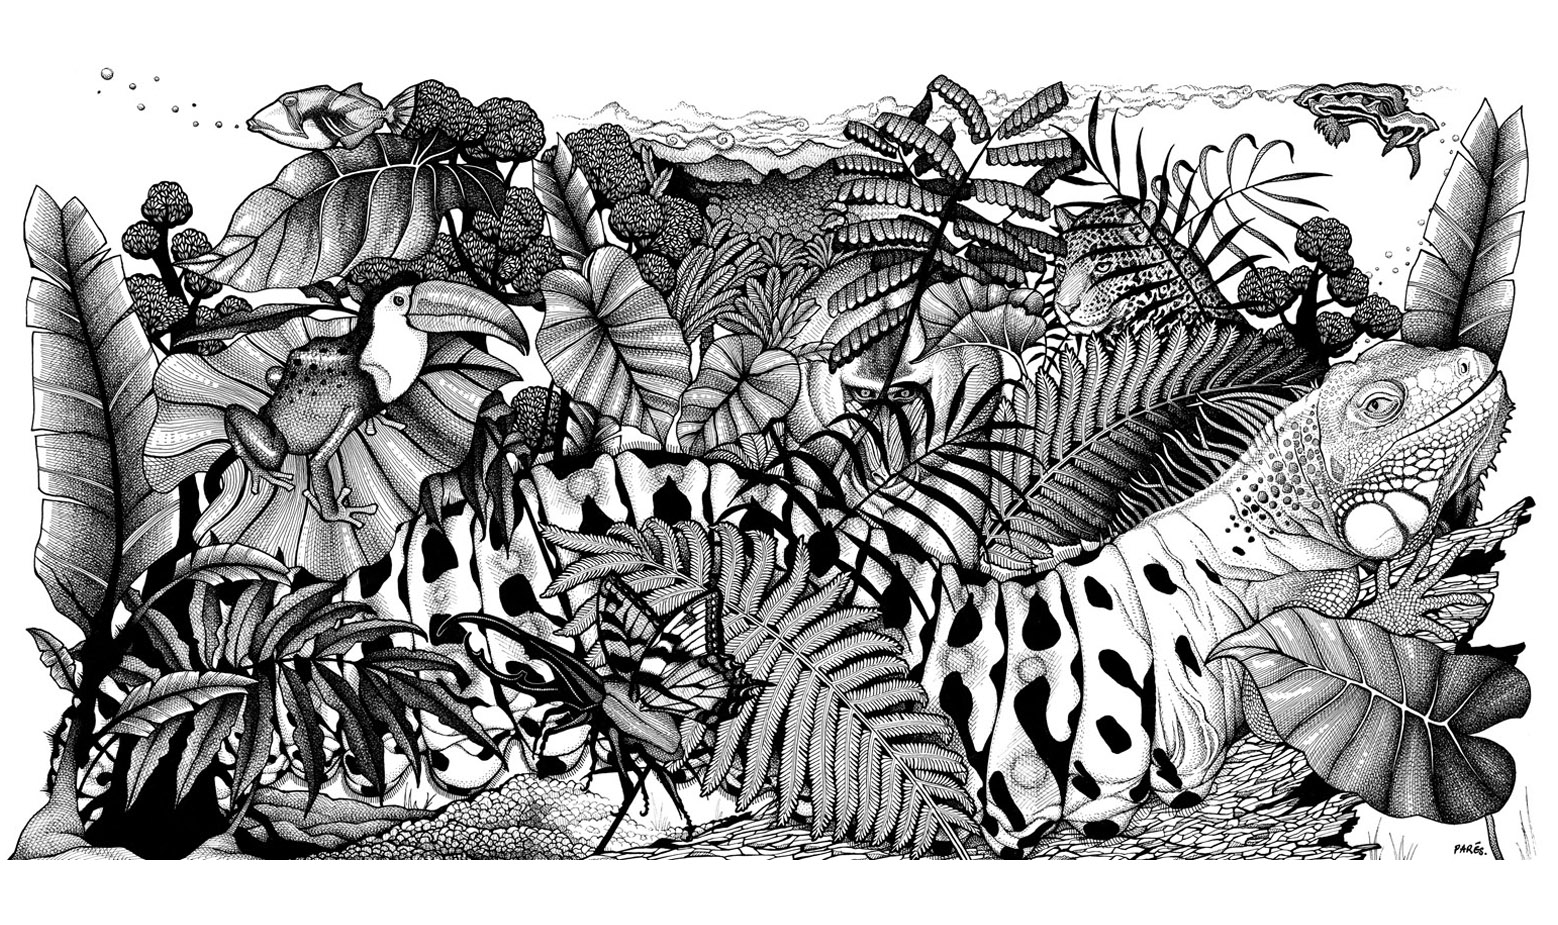 Superb black and white drawing to print and color with lush vegetation hiding many animals ... By coloring them to make them easier to see! Lots of detail, Artist : Paola Parés